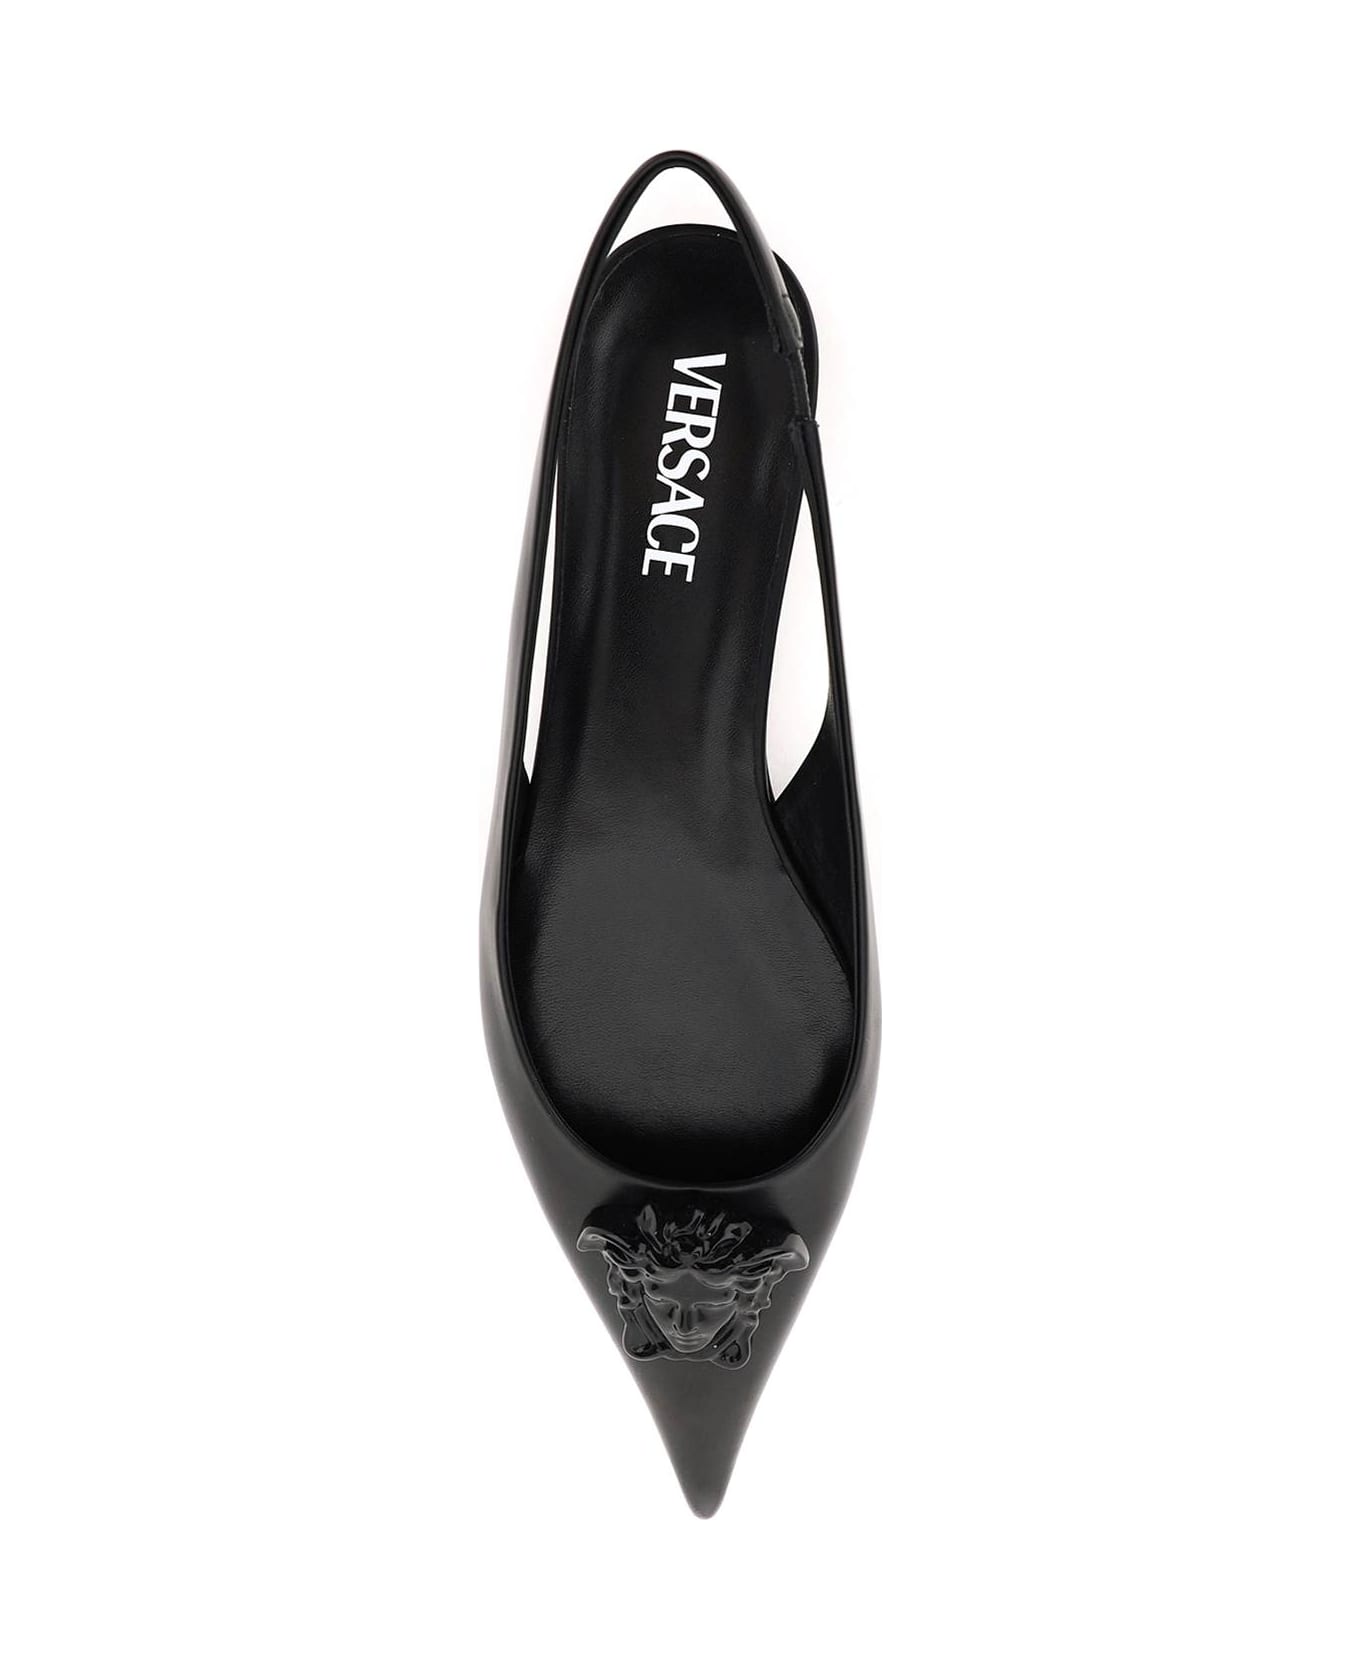 White Versace Leather La Medusa Slingback Ballet Flats in Nero Womens Shoes Flats and flat shoes Ballet flats and ballerina shoes 